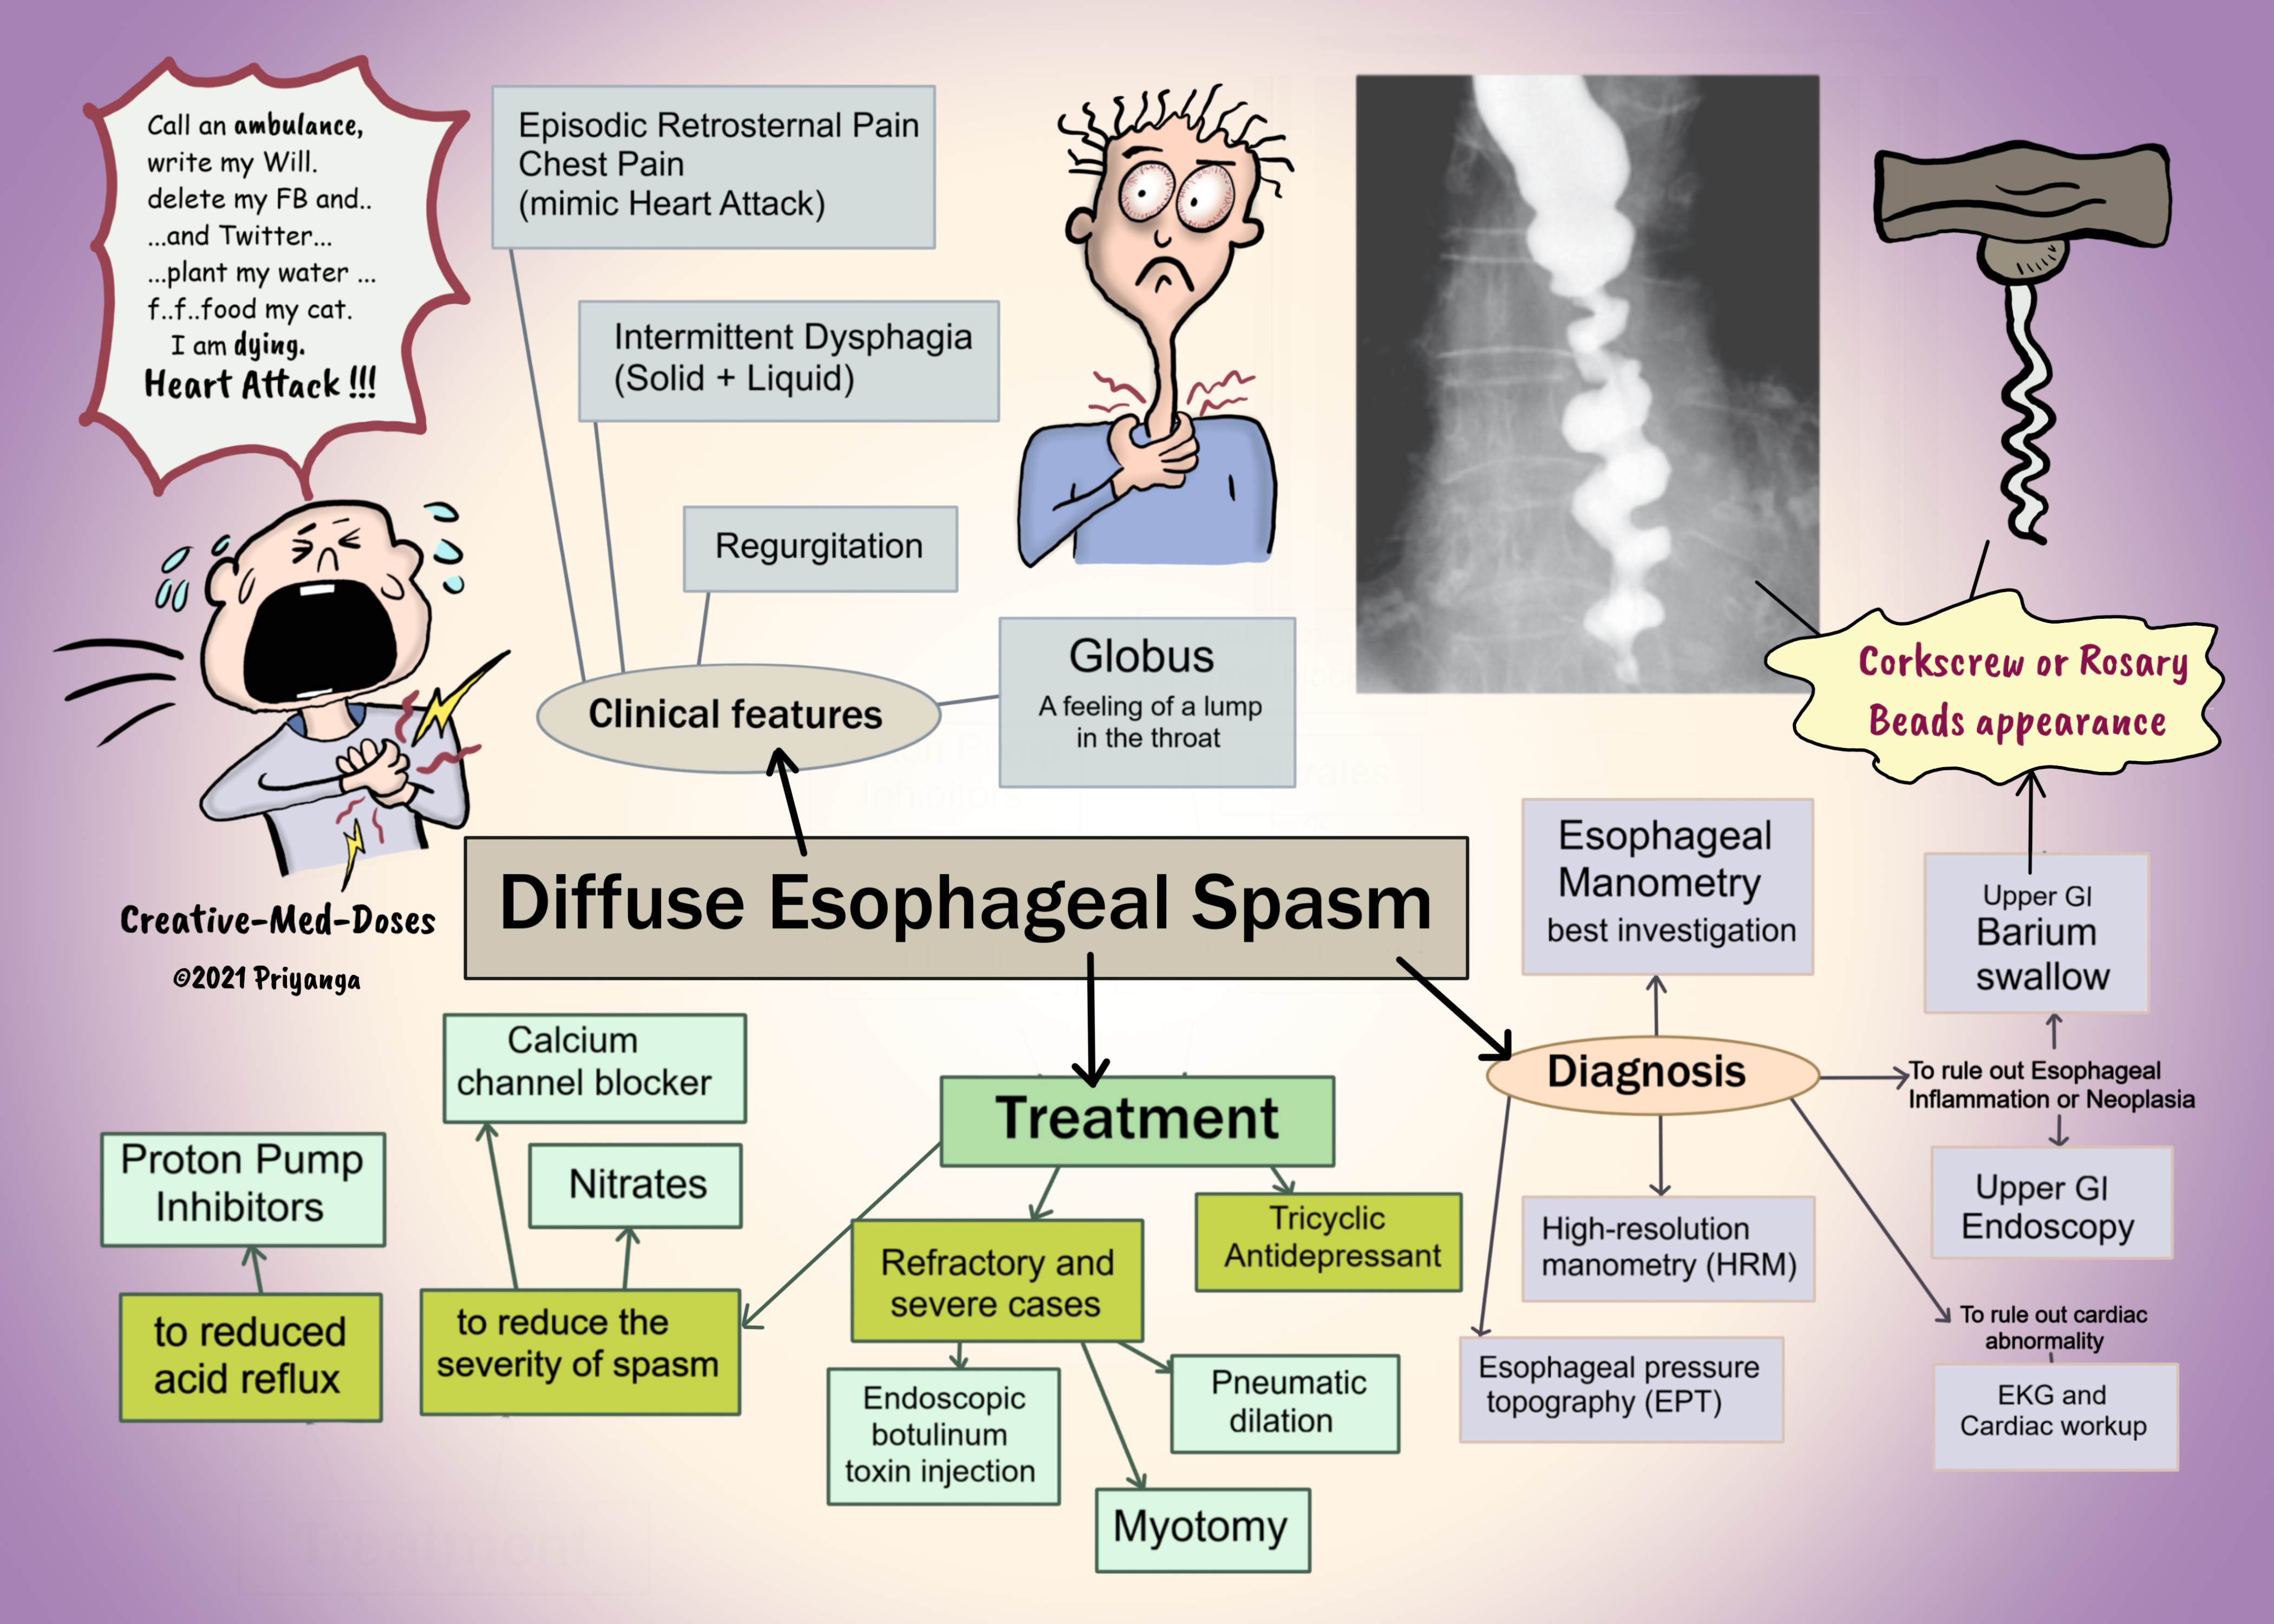 Diffuse esophageal spasm,Corkscrew or rosary beads appearance on barium study 